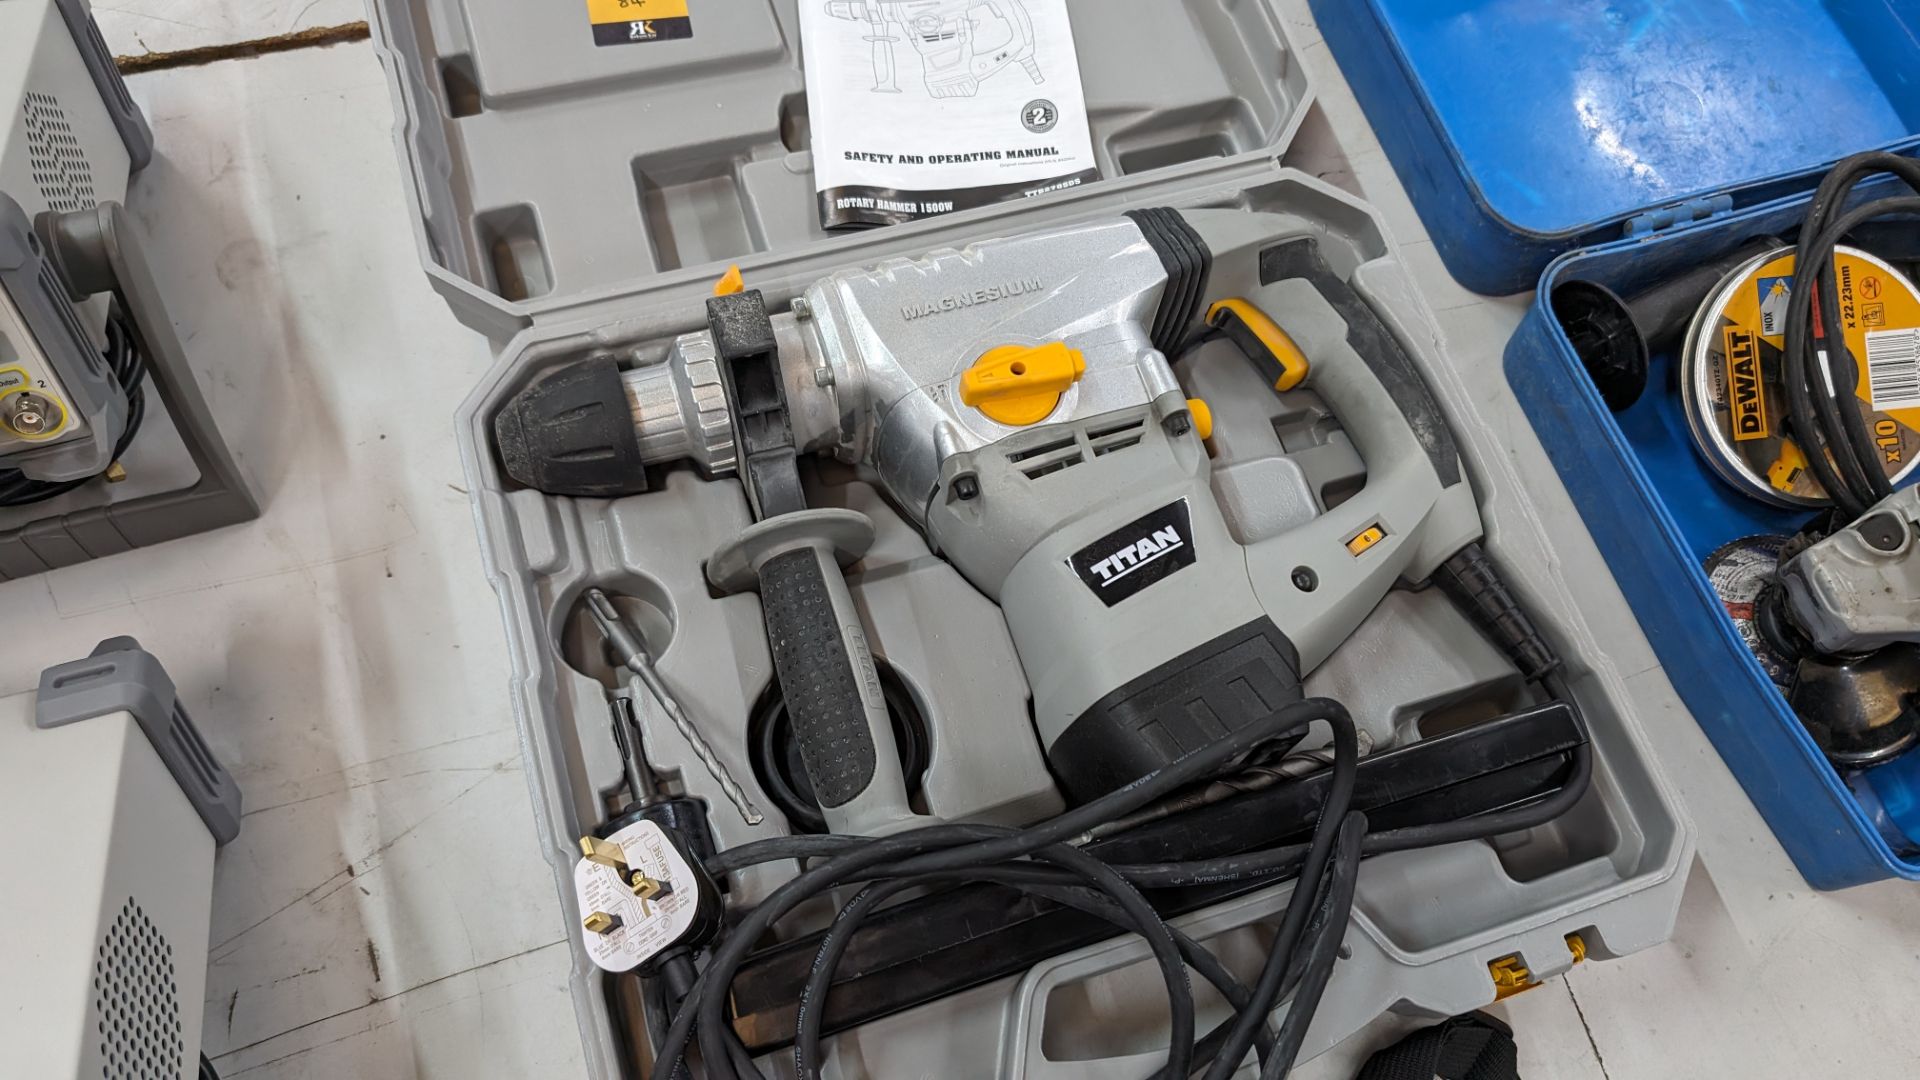 Titan magnesium rotary hammer drill, 1500W, model TTB278SDS. Includes dedicated case & operating ma - Image 4 of 11